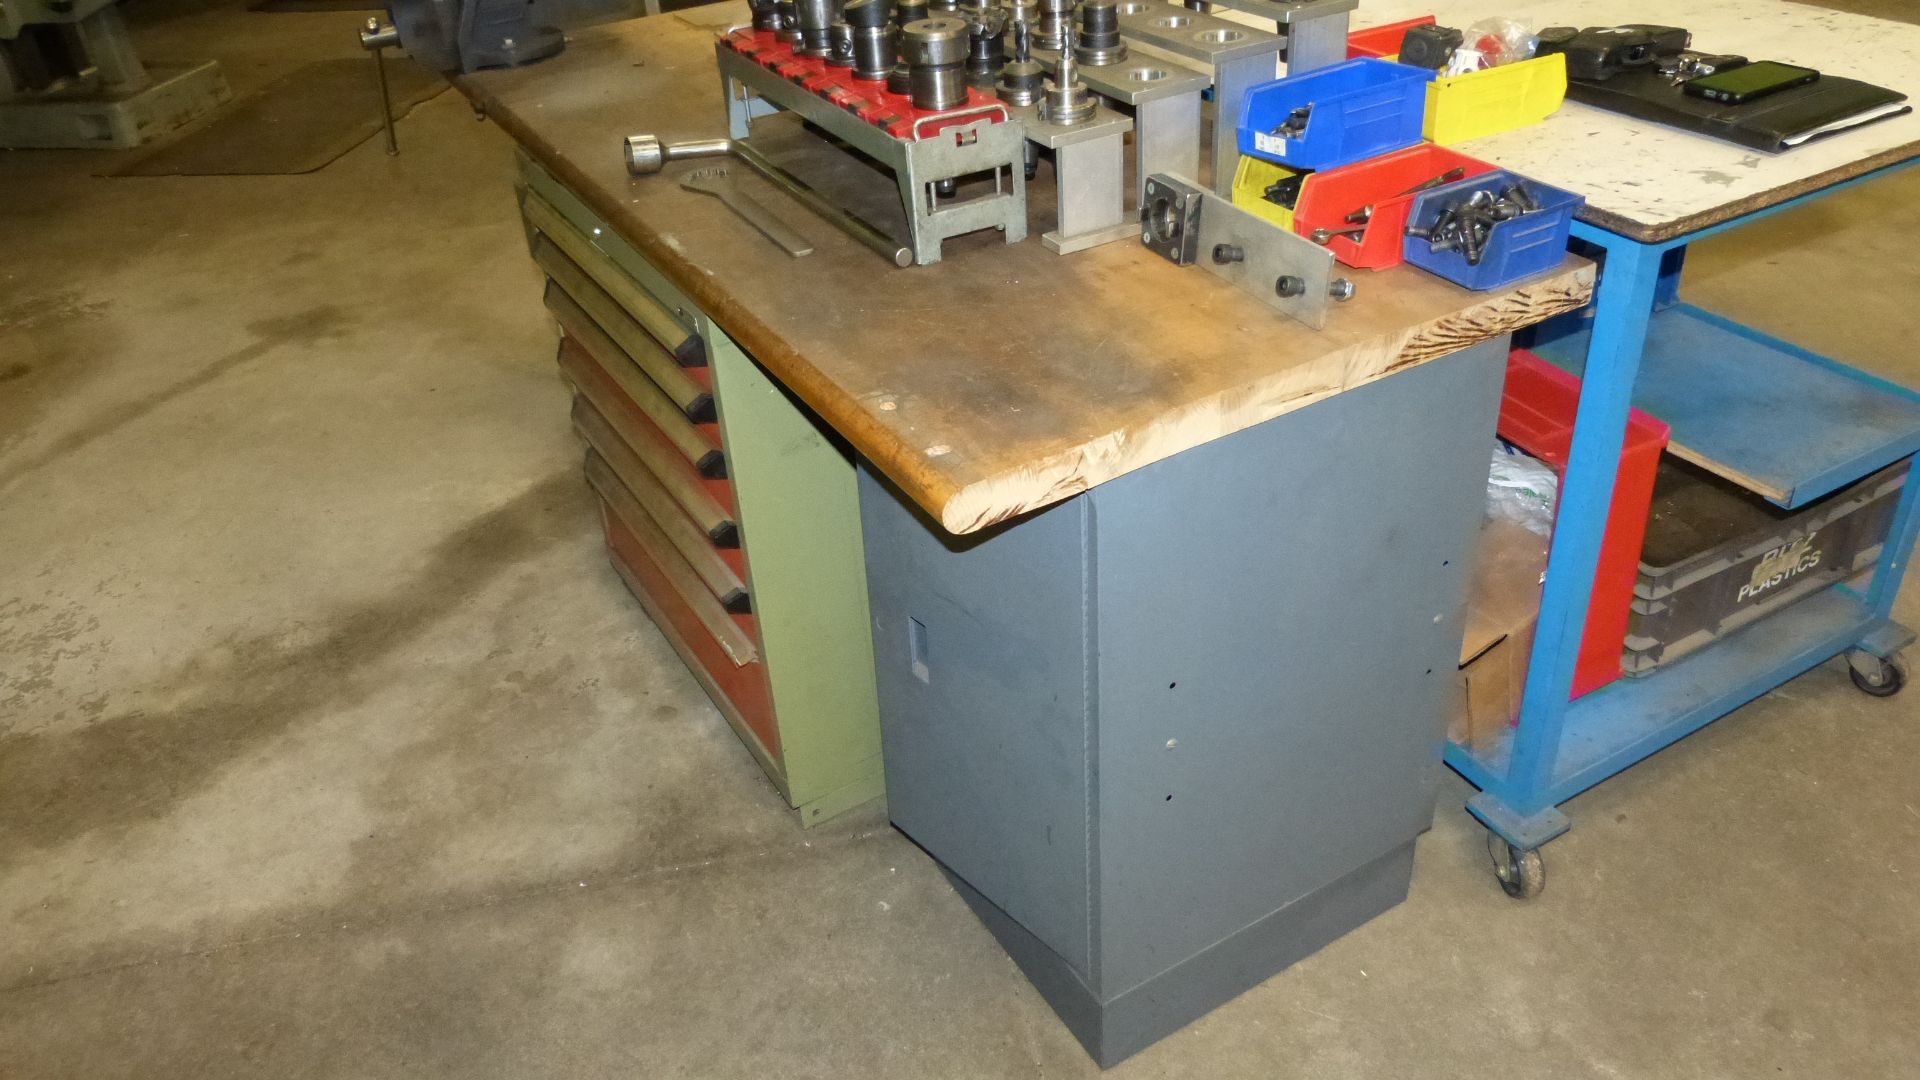 WOOD TOP SHOP TABLE W/METAL BASE, CABINETS, AND VISE (GREEN/ORANGE CABINET NOT INCLUDED) - Image 3 of 3